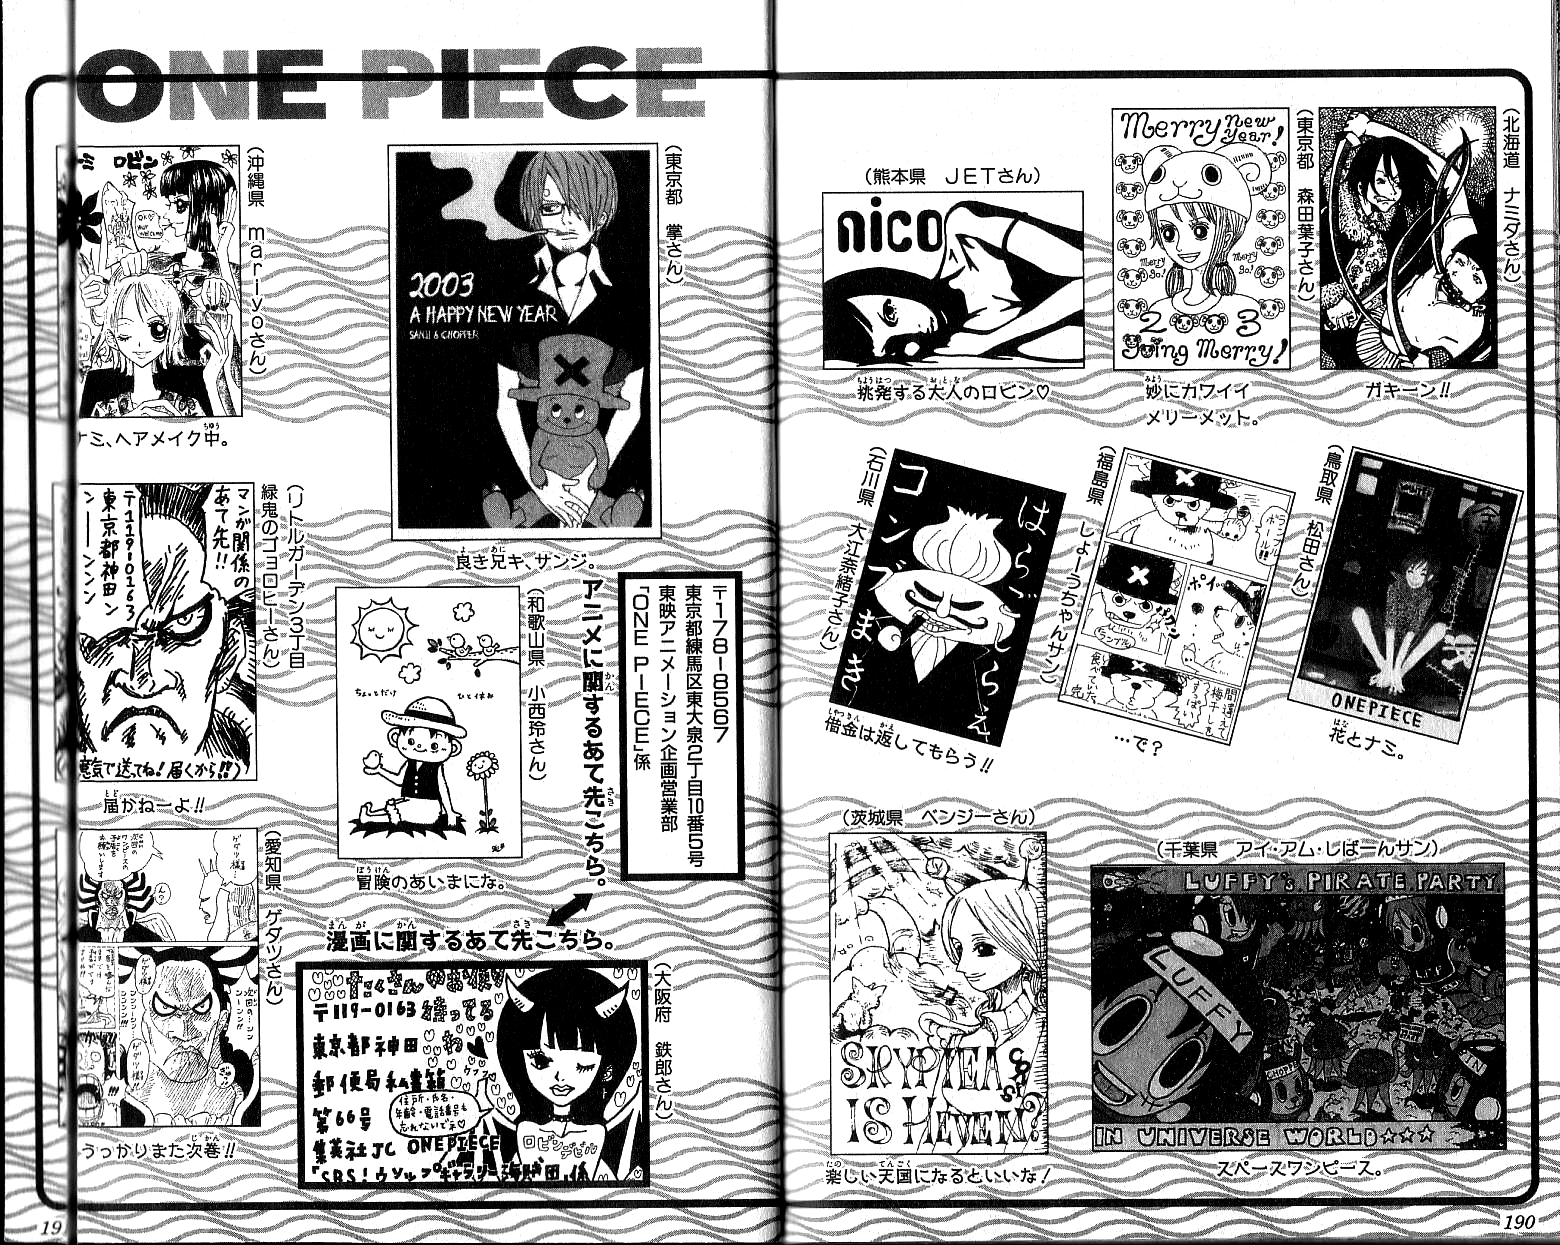 We Are! Reading One Piece Podcast Episode 28-Volume 28: Wyper the Berserker  